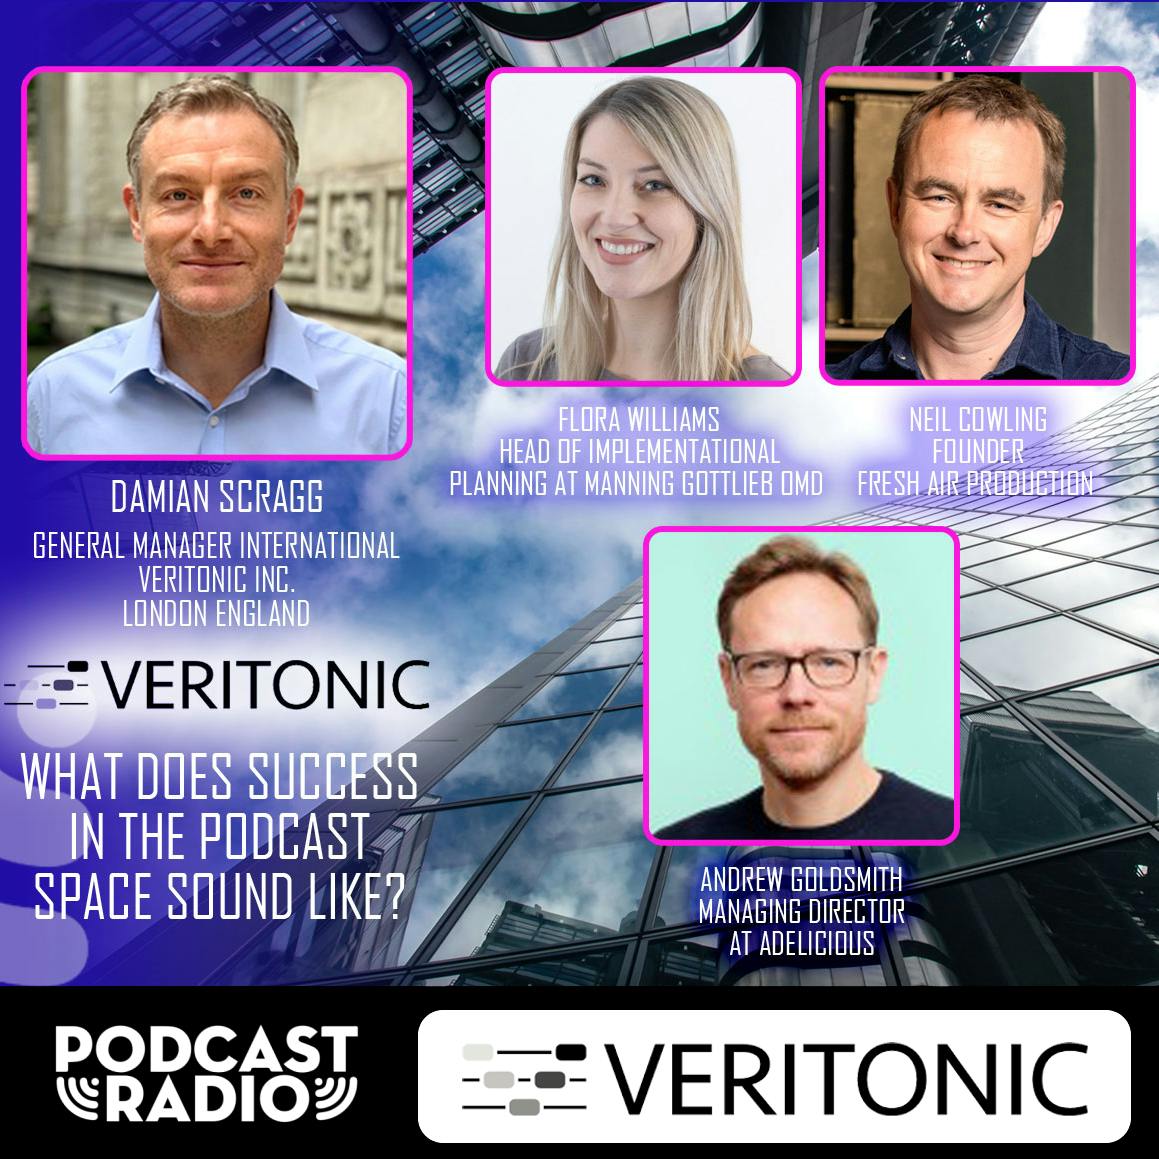 Podcast Futures: Veritonic - What Does Success In The Podcast Space Sound Like?